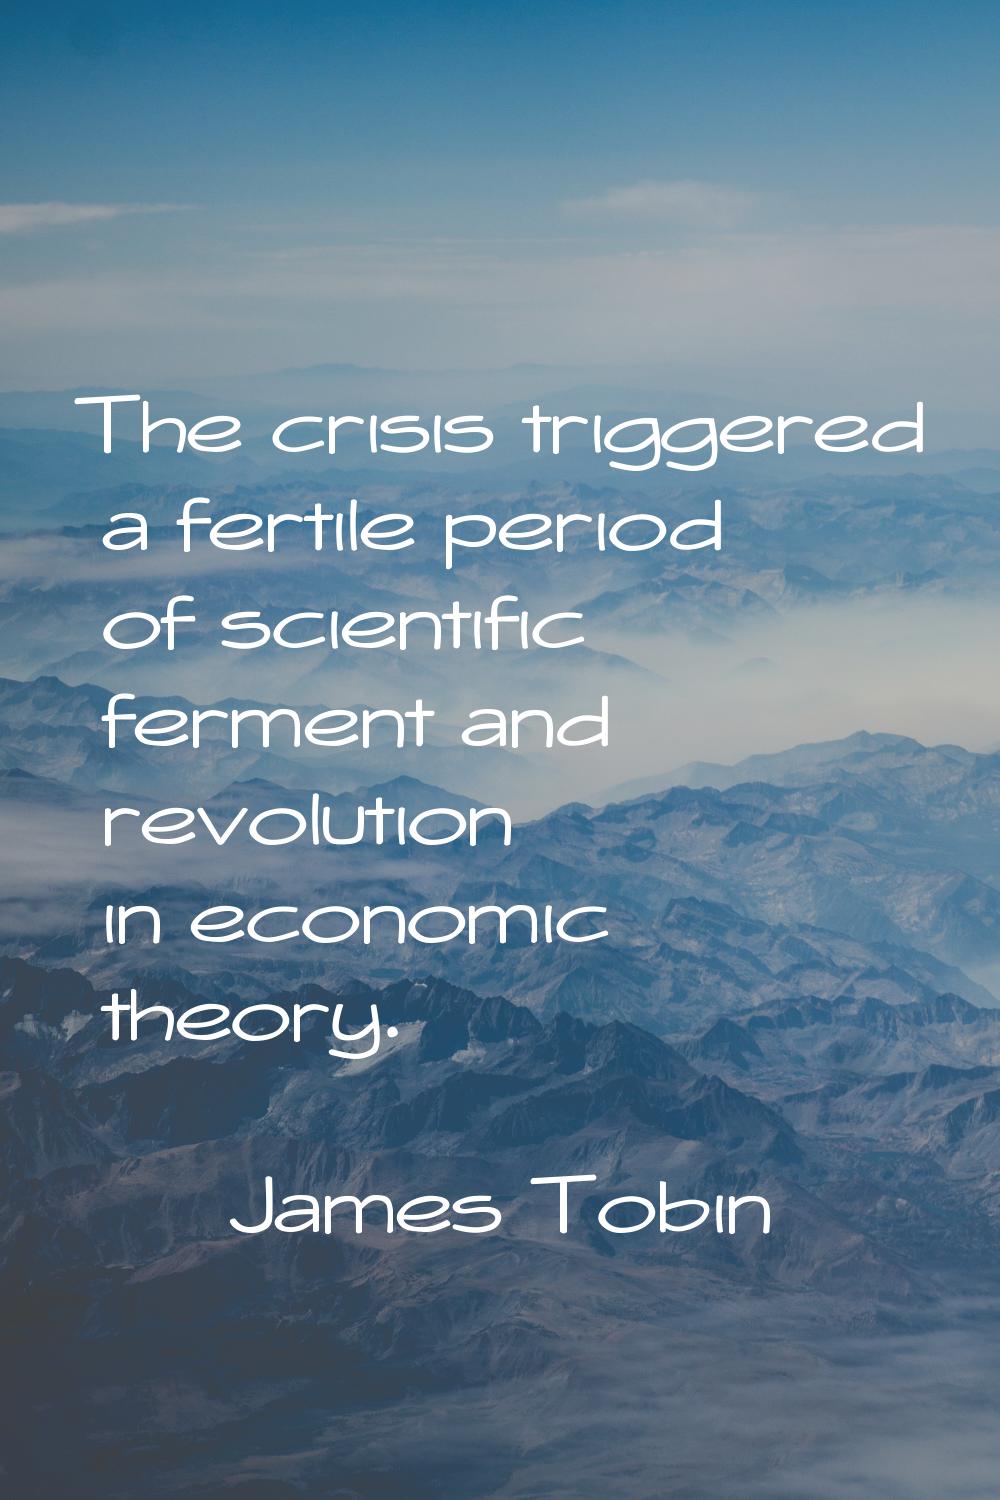 The crisis triggered a fertile period of scientific ferment and revolution in economic theory.